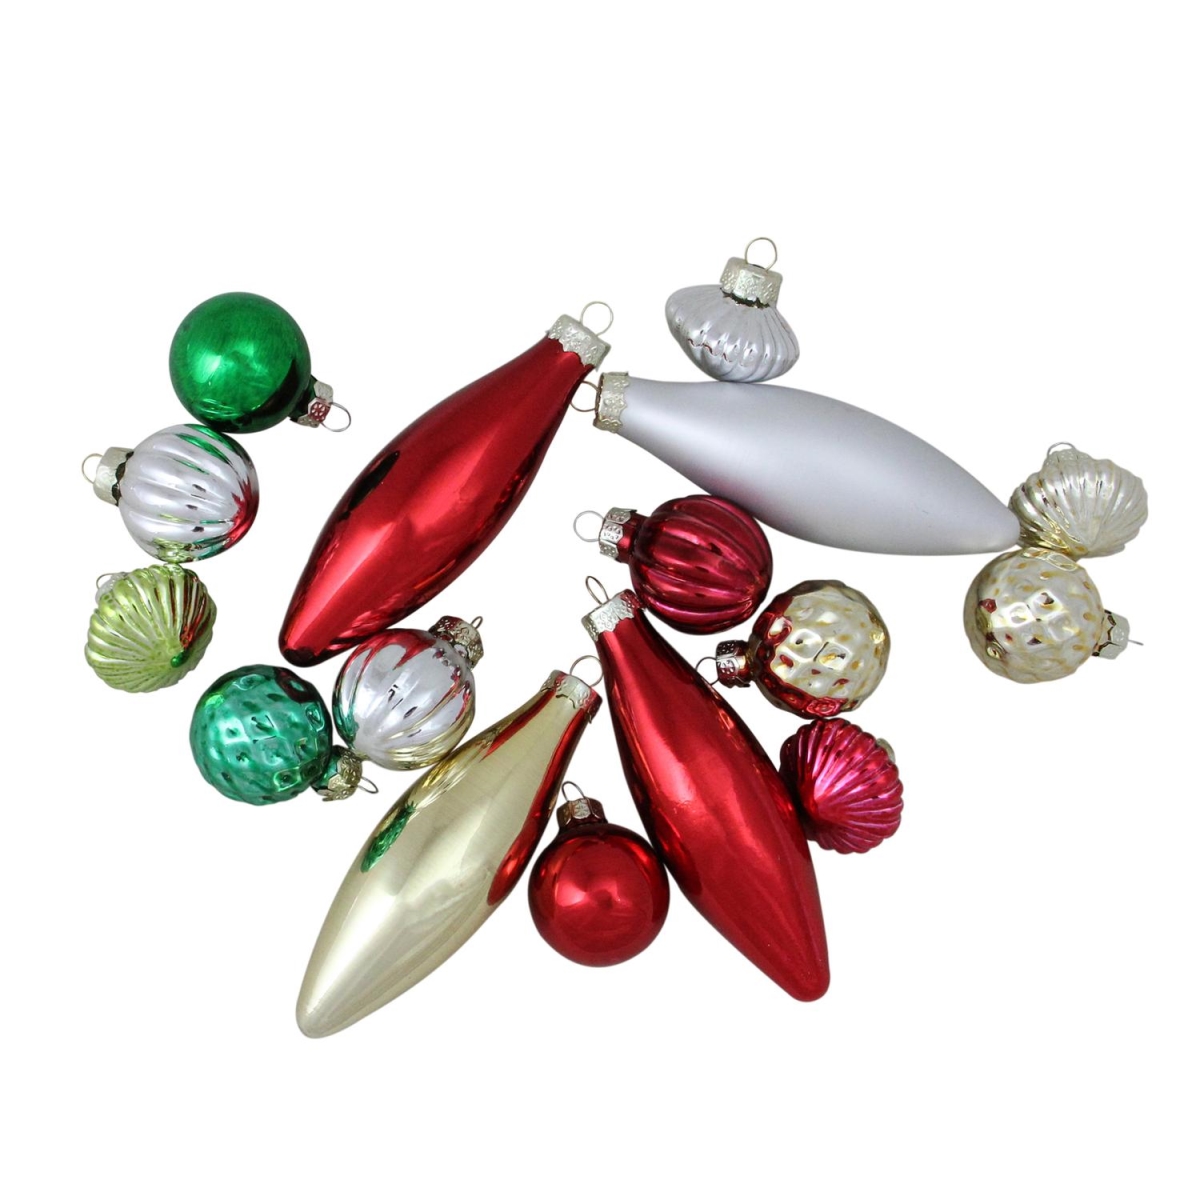 32636488 4 In. Traditional Finial Ball & Onion Shaped Christmas Ornaments - 16 Piece